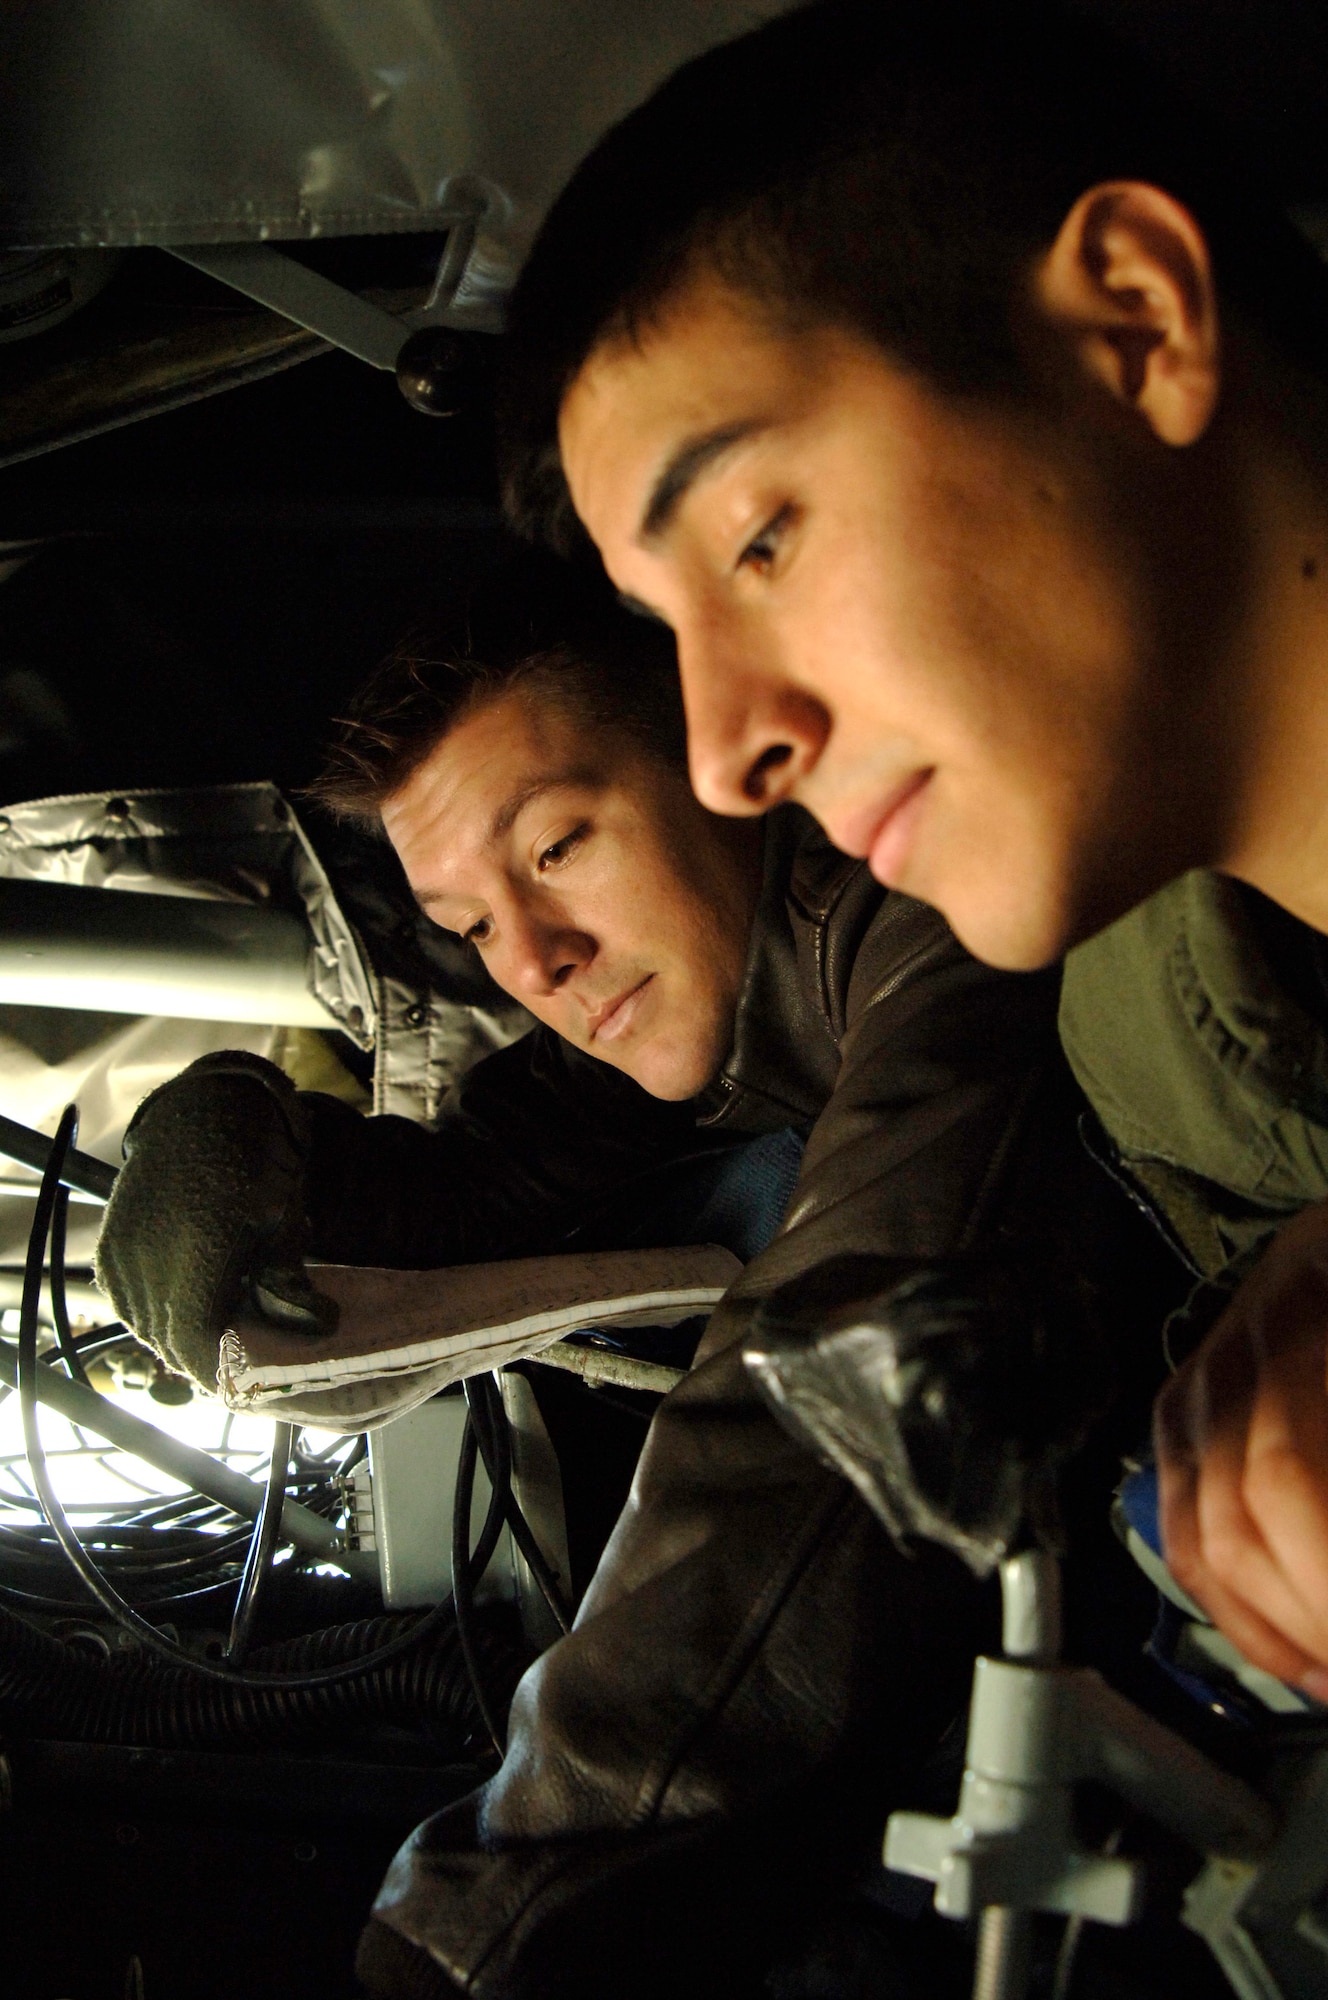 MCCONNELL AIR FORCE BASE, Kan. -- Senior Airman Rob Poe, 349th Air Refueling Squadron, trains Senior Airman Jeremiah Ibarra, 349th Air Refueling Squadron, on the in-flight refueling system on Nov. 26. In-flight refueling system operators make a difference by safely and completely checking the aircraft before any mission. (Photo by Airman 1st Class Roy Lynch III)